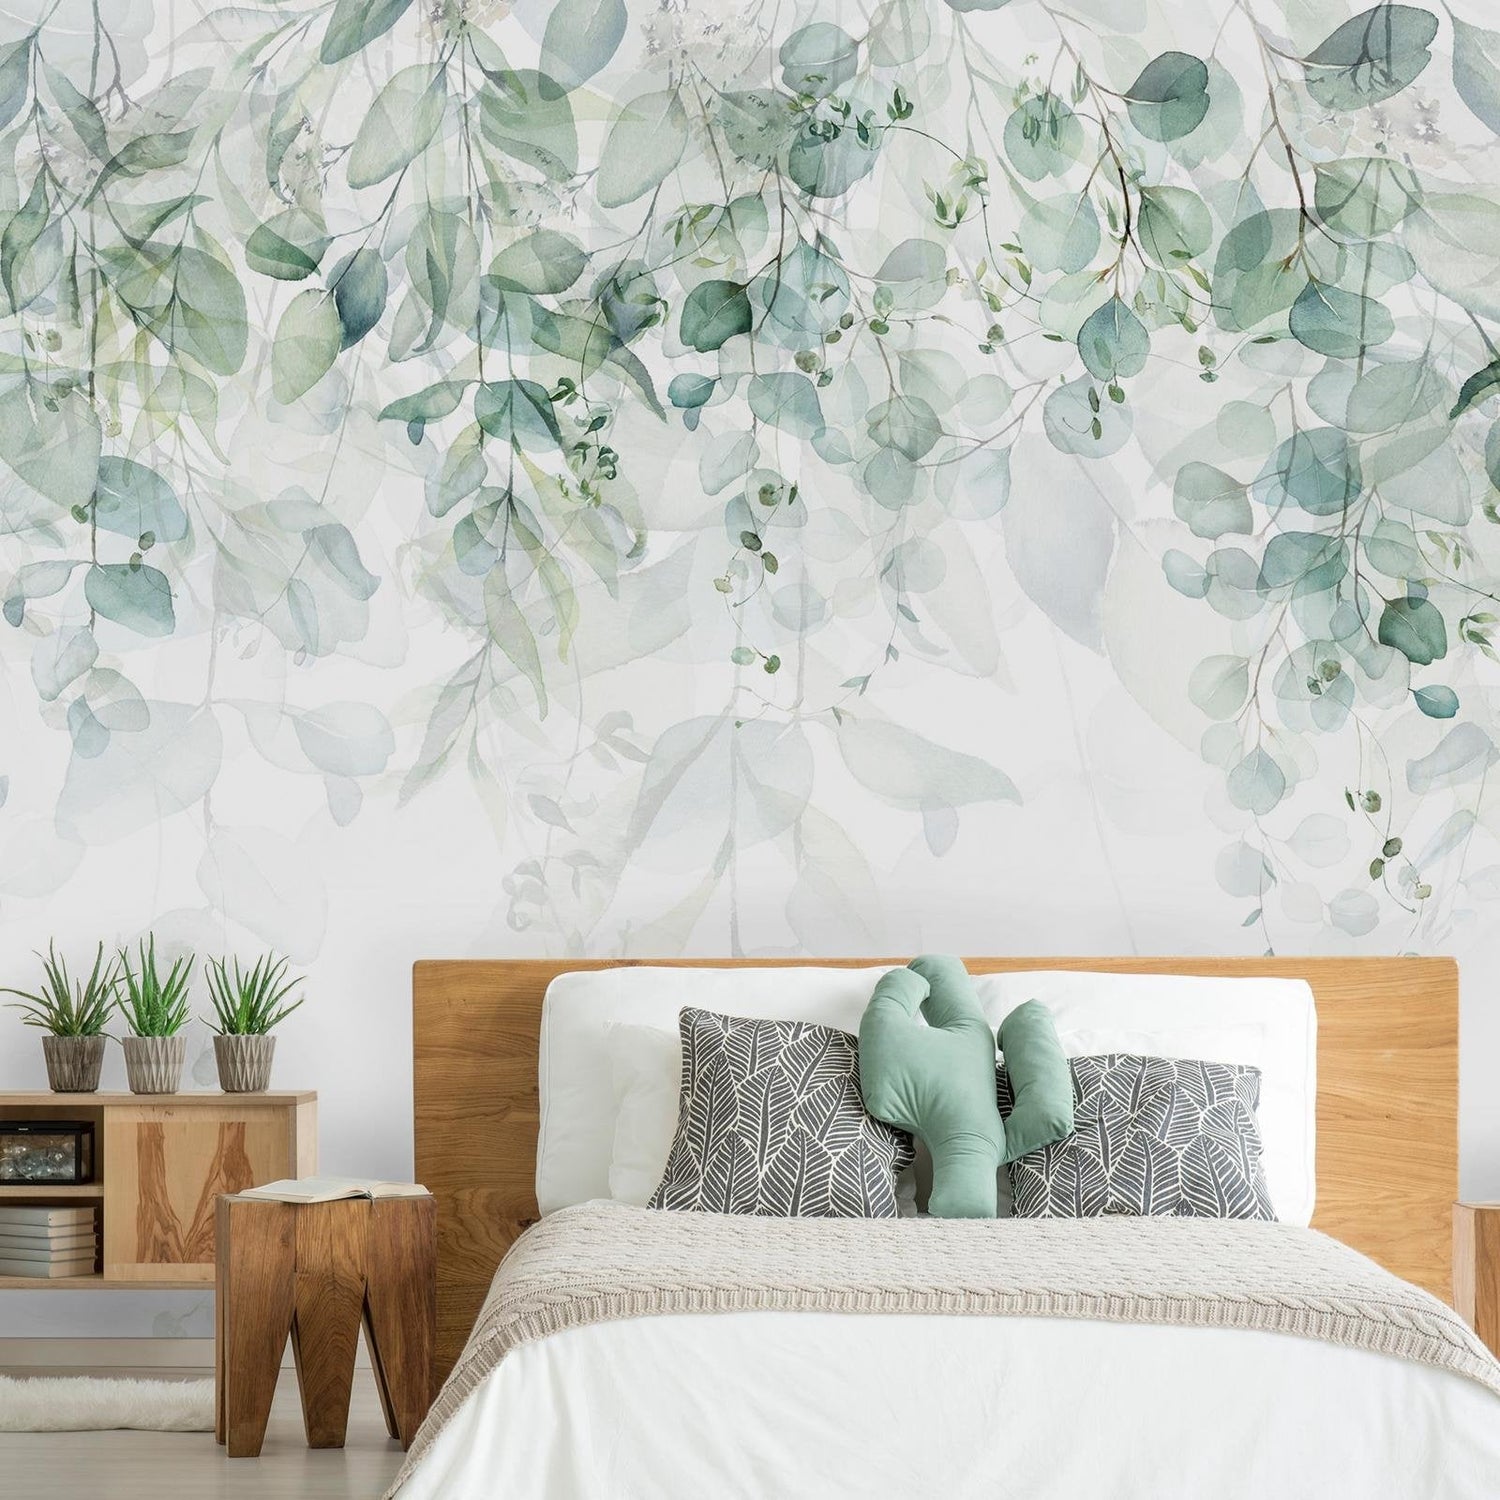 Tiptophomedecor Peel and Stick Botanical Wallpaper Wall Mural - Gentle Touch Of Nature - First Variant - Removable Wall Decals-Tiptophomedecor